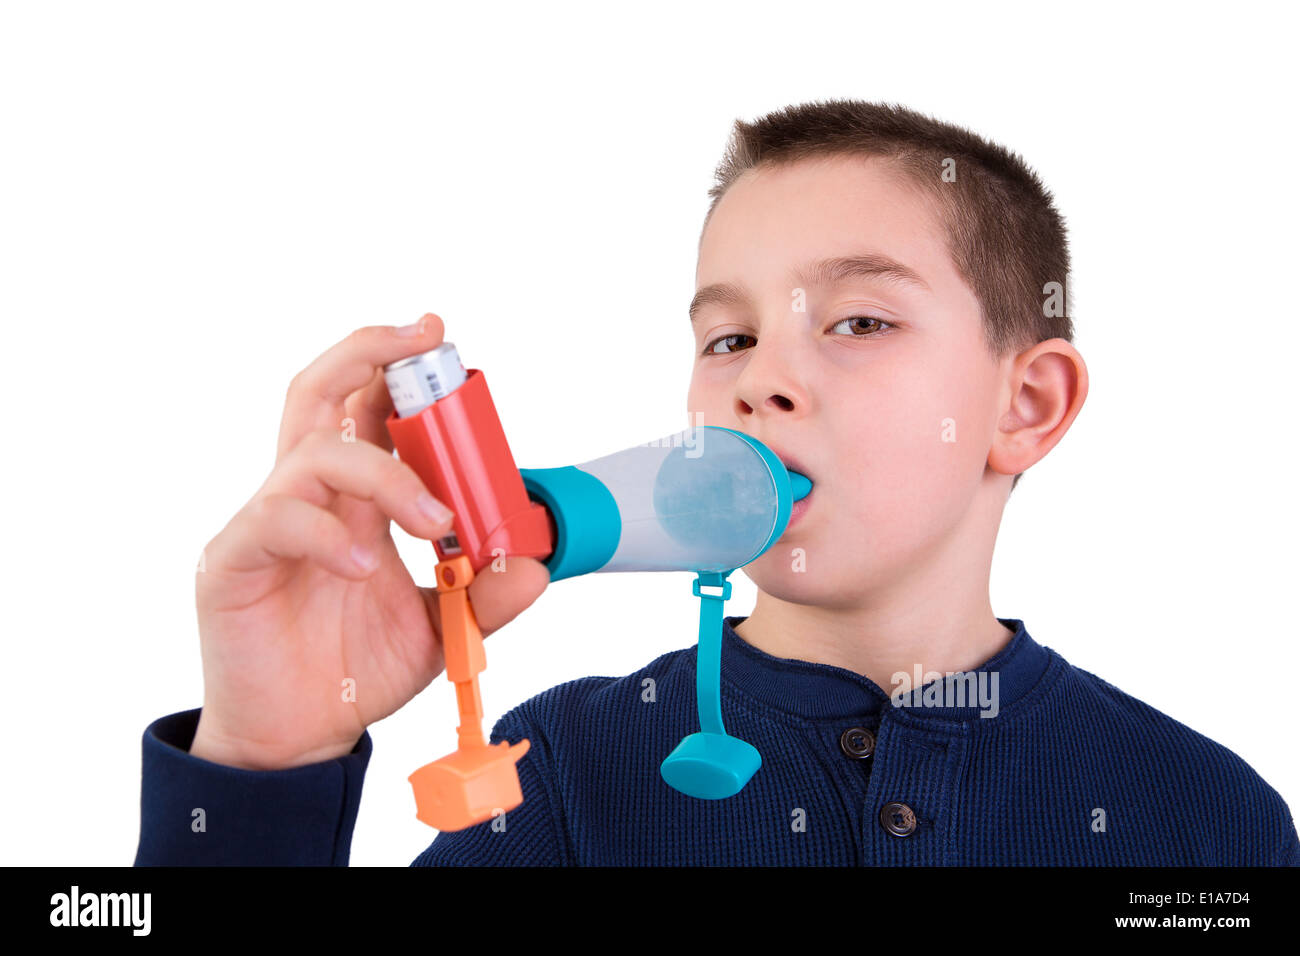 Nine years old kid with allergic asthma, inhaling his medication through spacer while looking at with his tired eyes Stock Photo